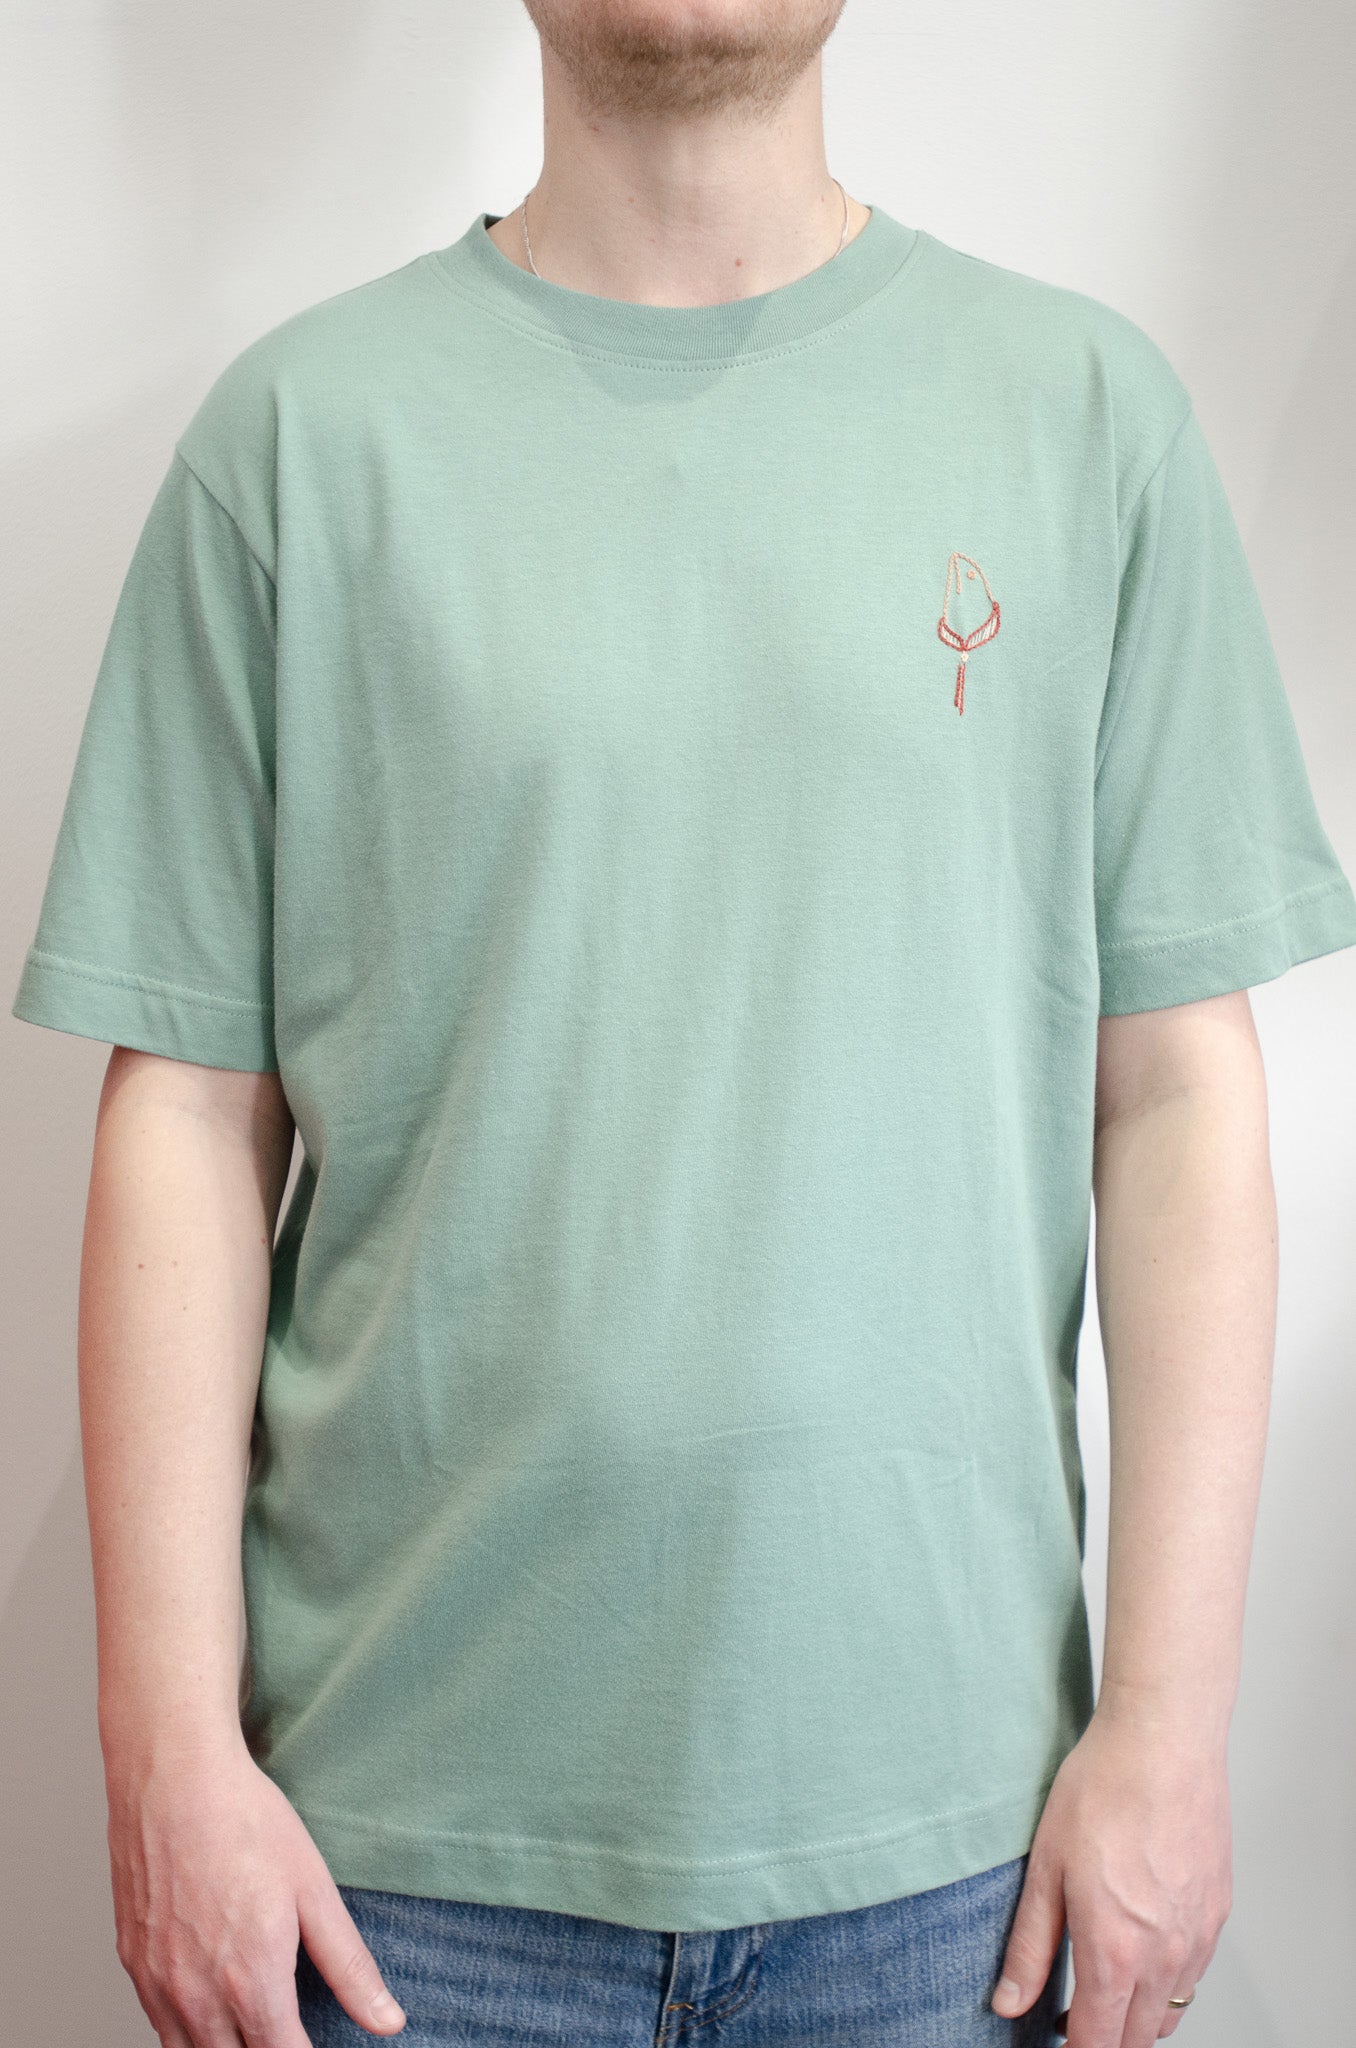 Embroidered T-Shirt - Kelp